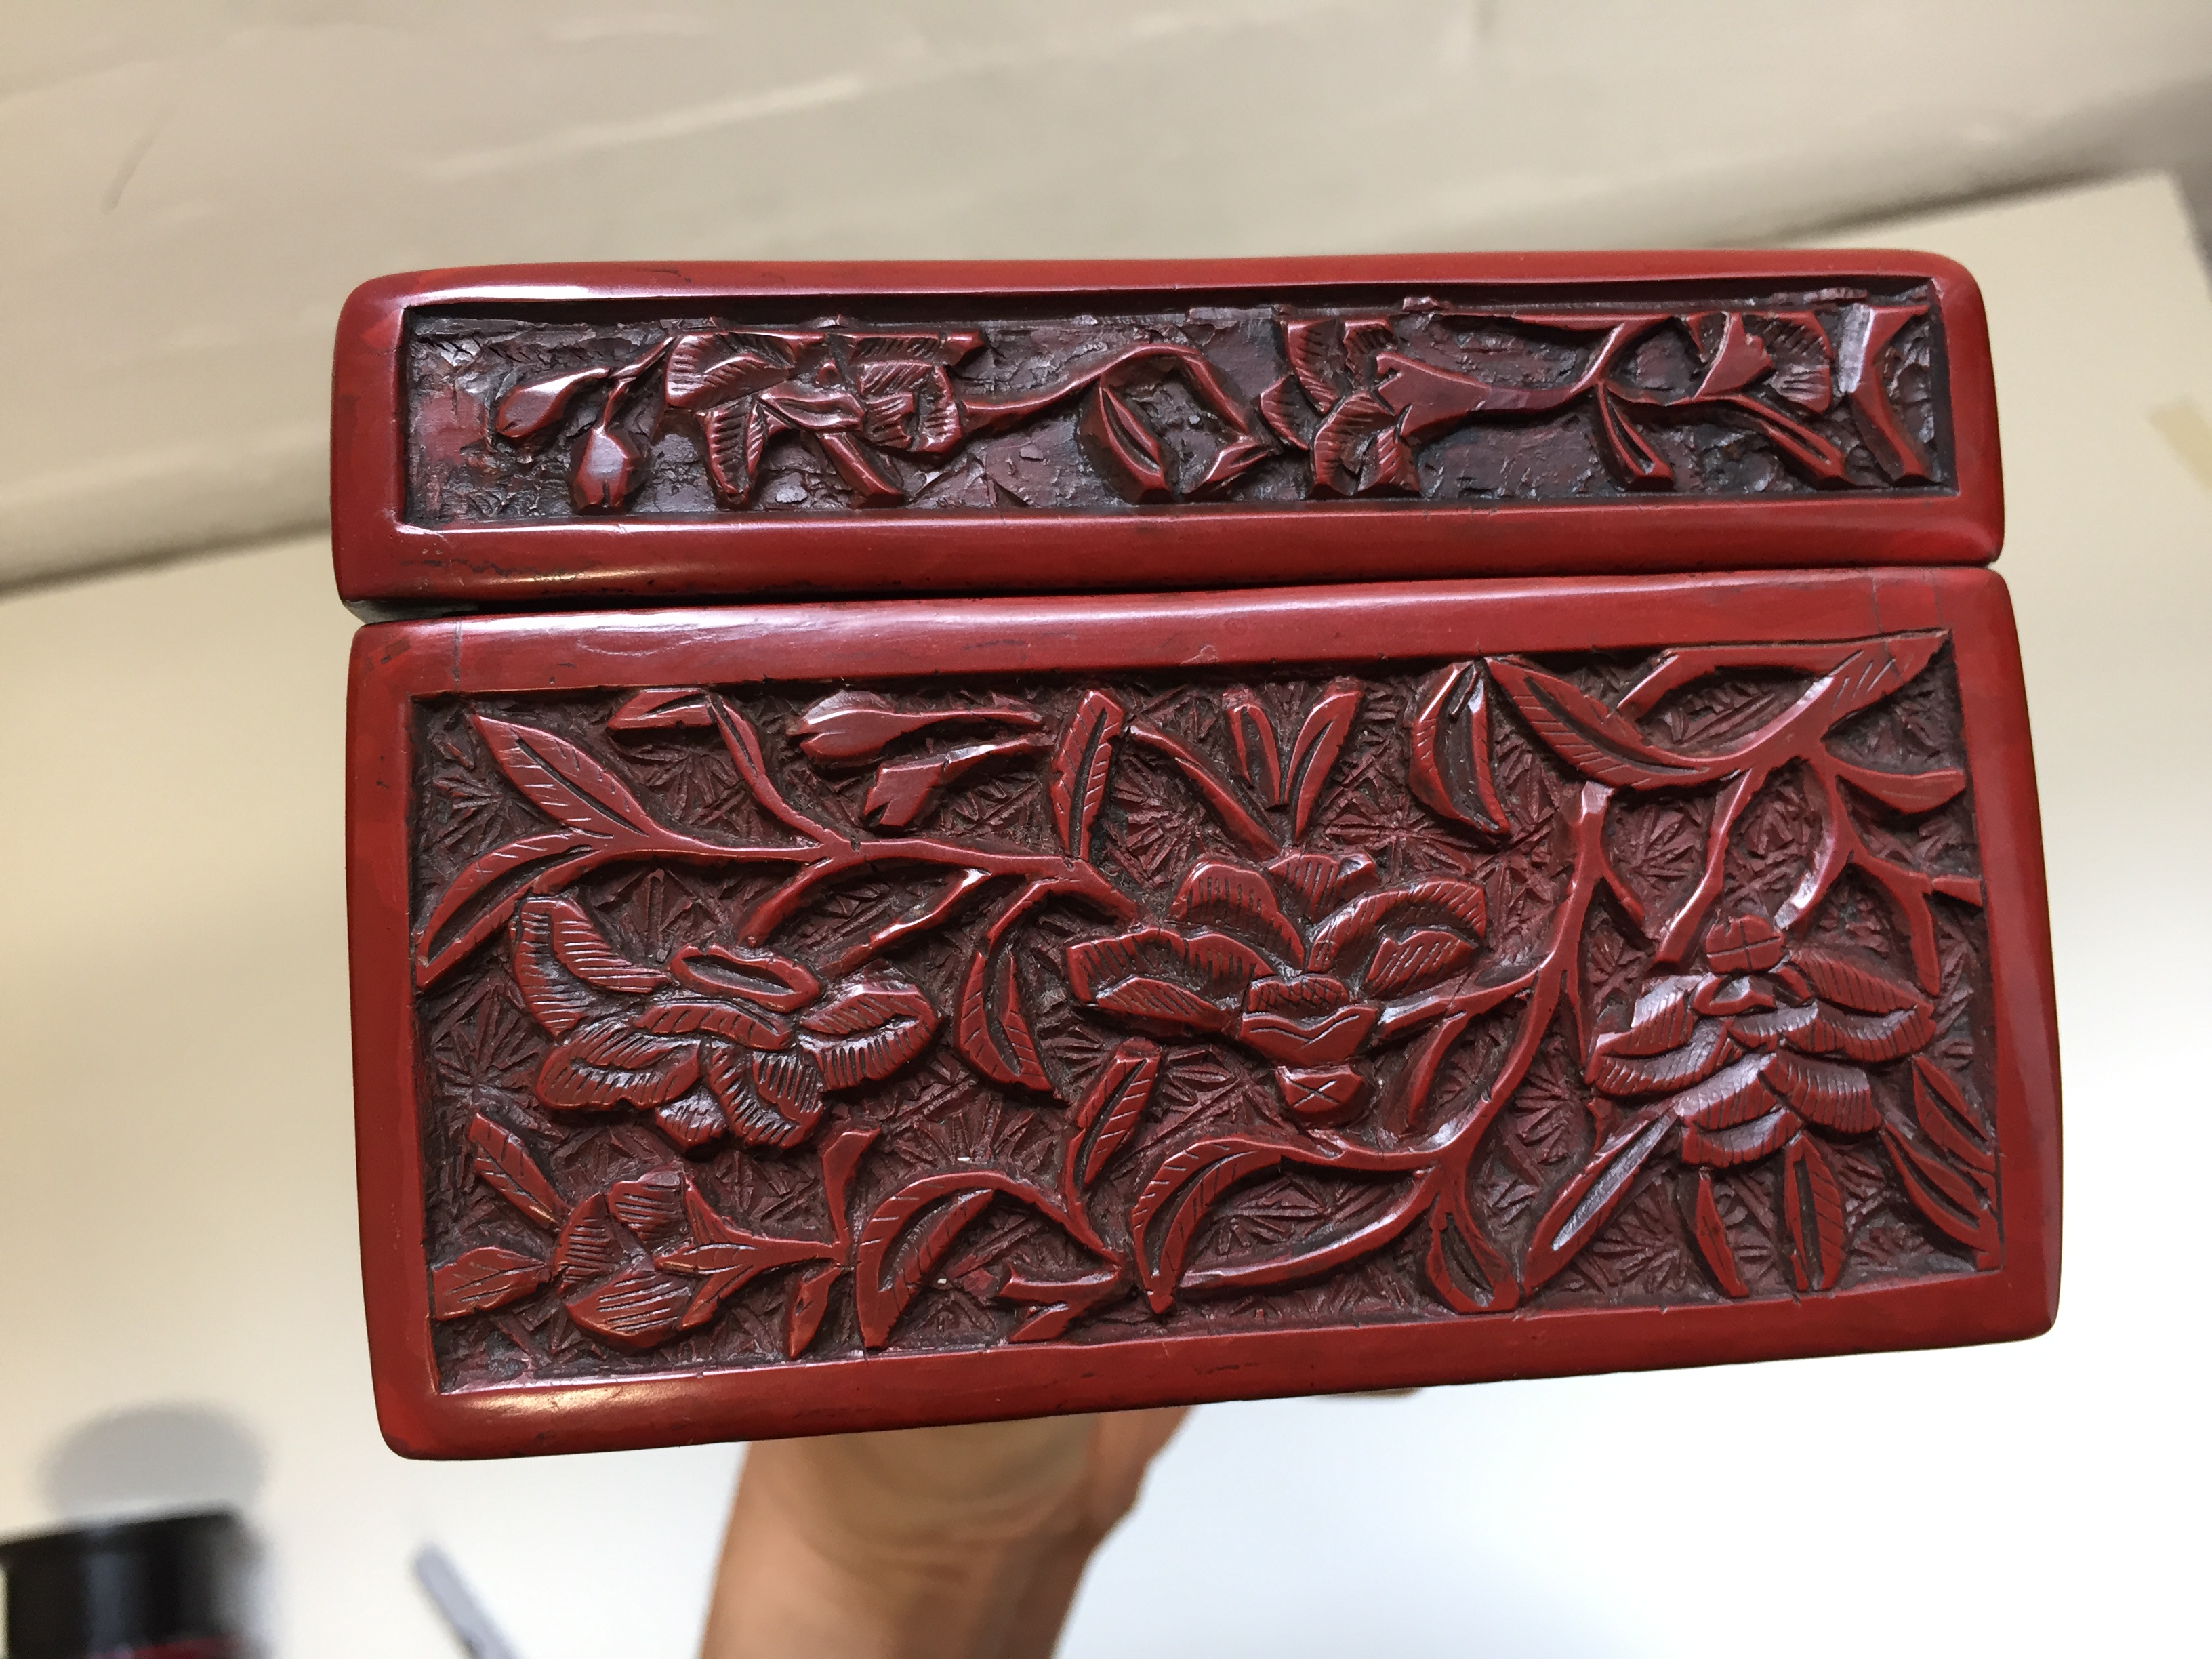 A CHINESE CINNABAR LACQUER 'MUSICIAN' BOX AND COVER 晚明 剔紅圖高士行樂圖紋蓋盒 - Image 11 of 20